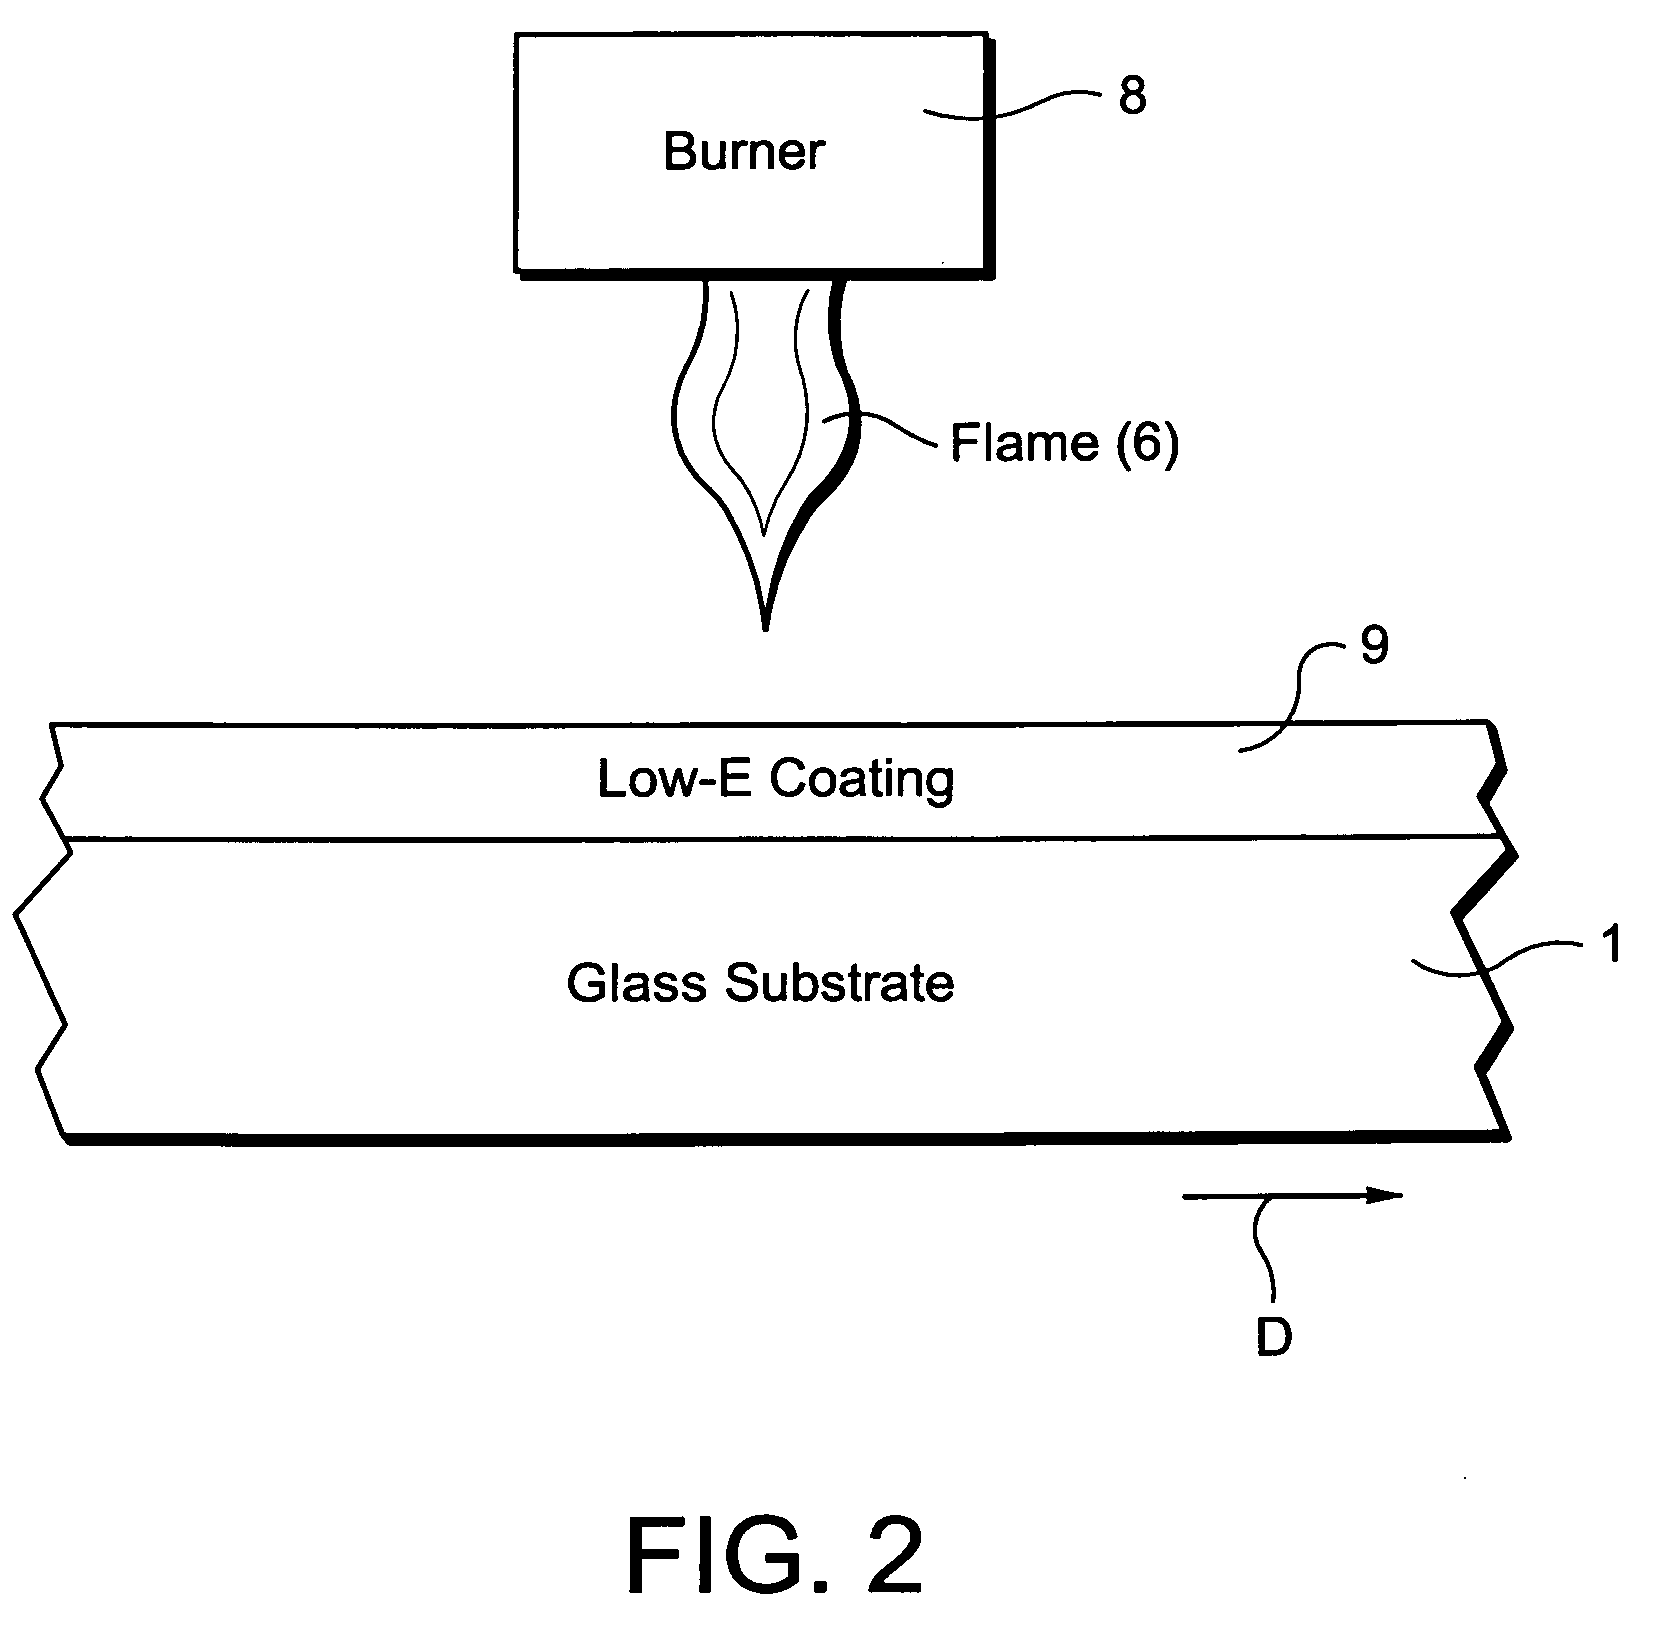 Method of making coated article using rapid heating for reducing emissivity and/or sheet resistance, and corresponding product